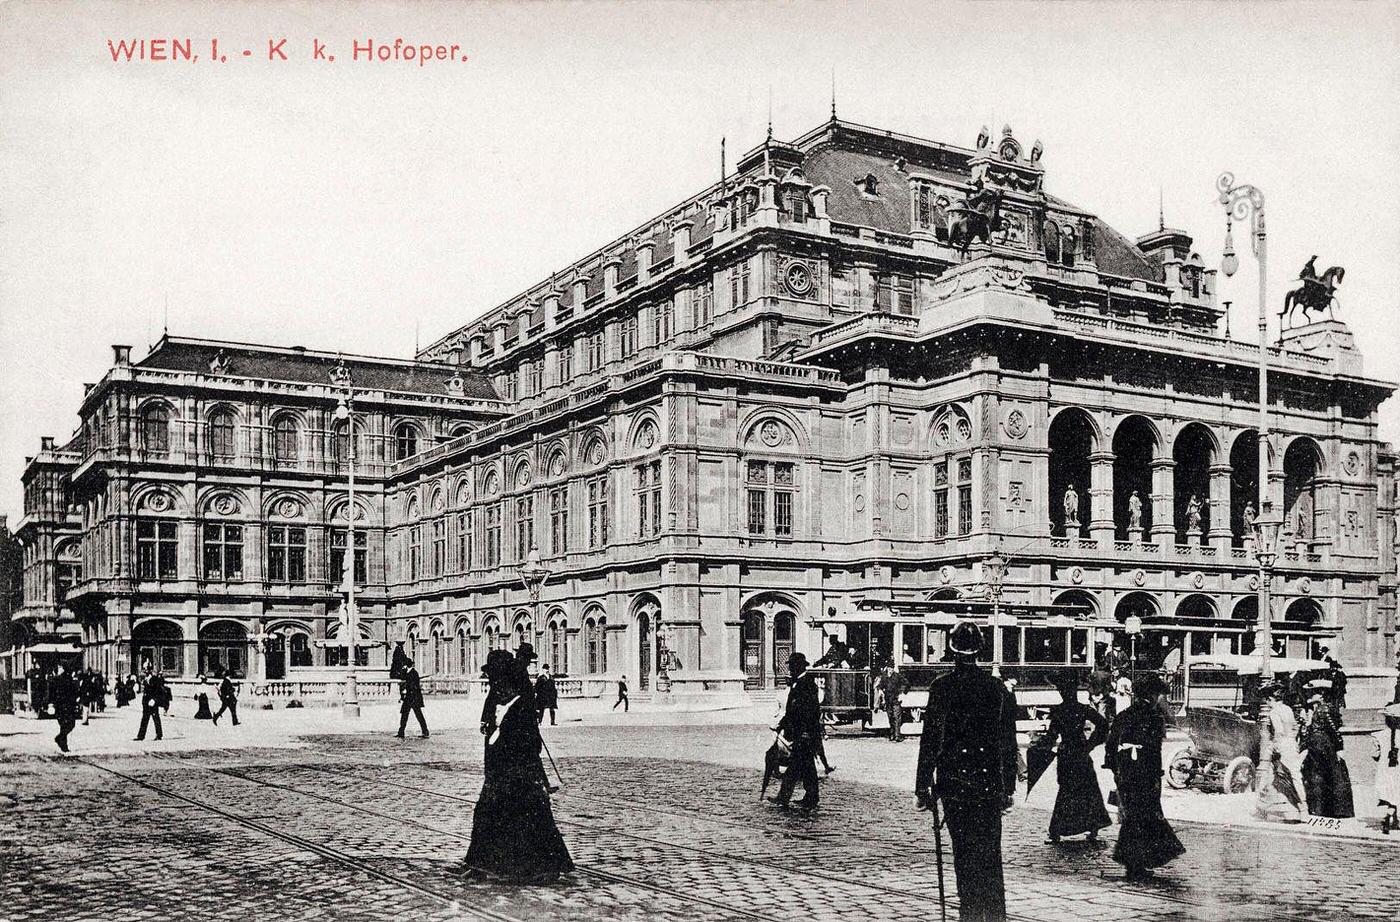 Vienna Opera House - exterior view from the early 1900s, 1900s